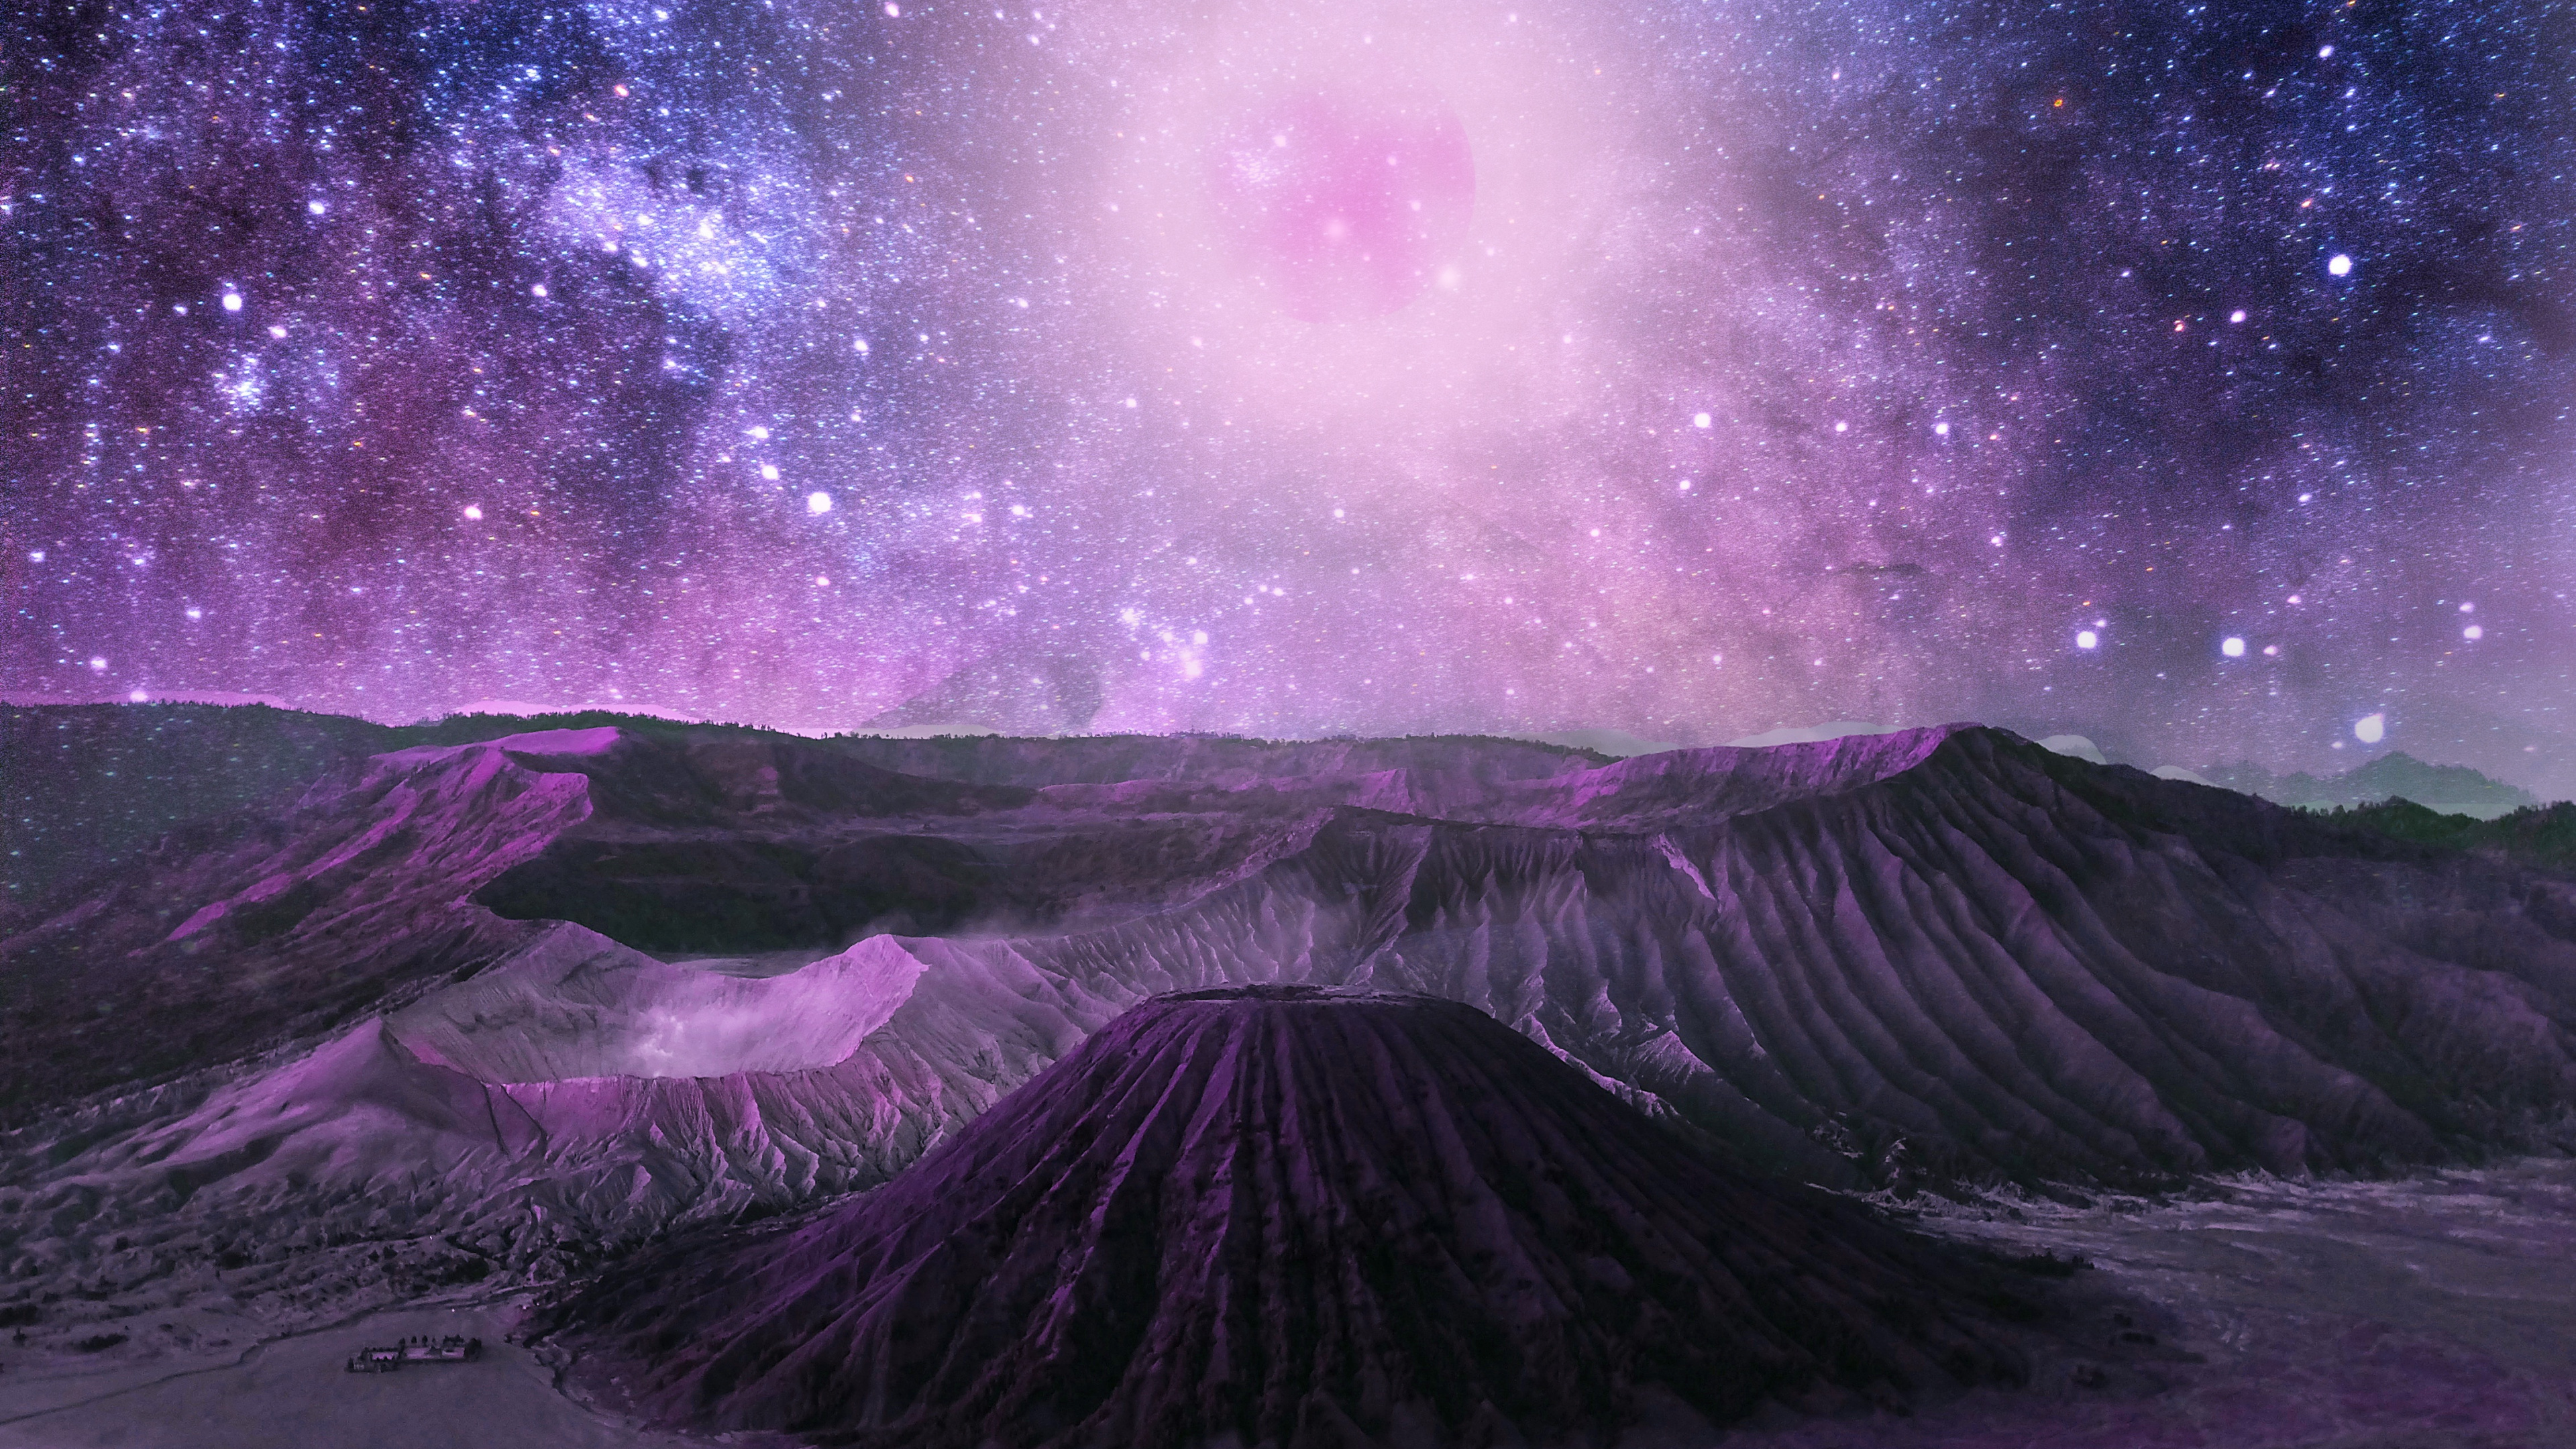 Purple and Black Sky With Stars. Wallpaper in 3840x2160 Resolution